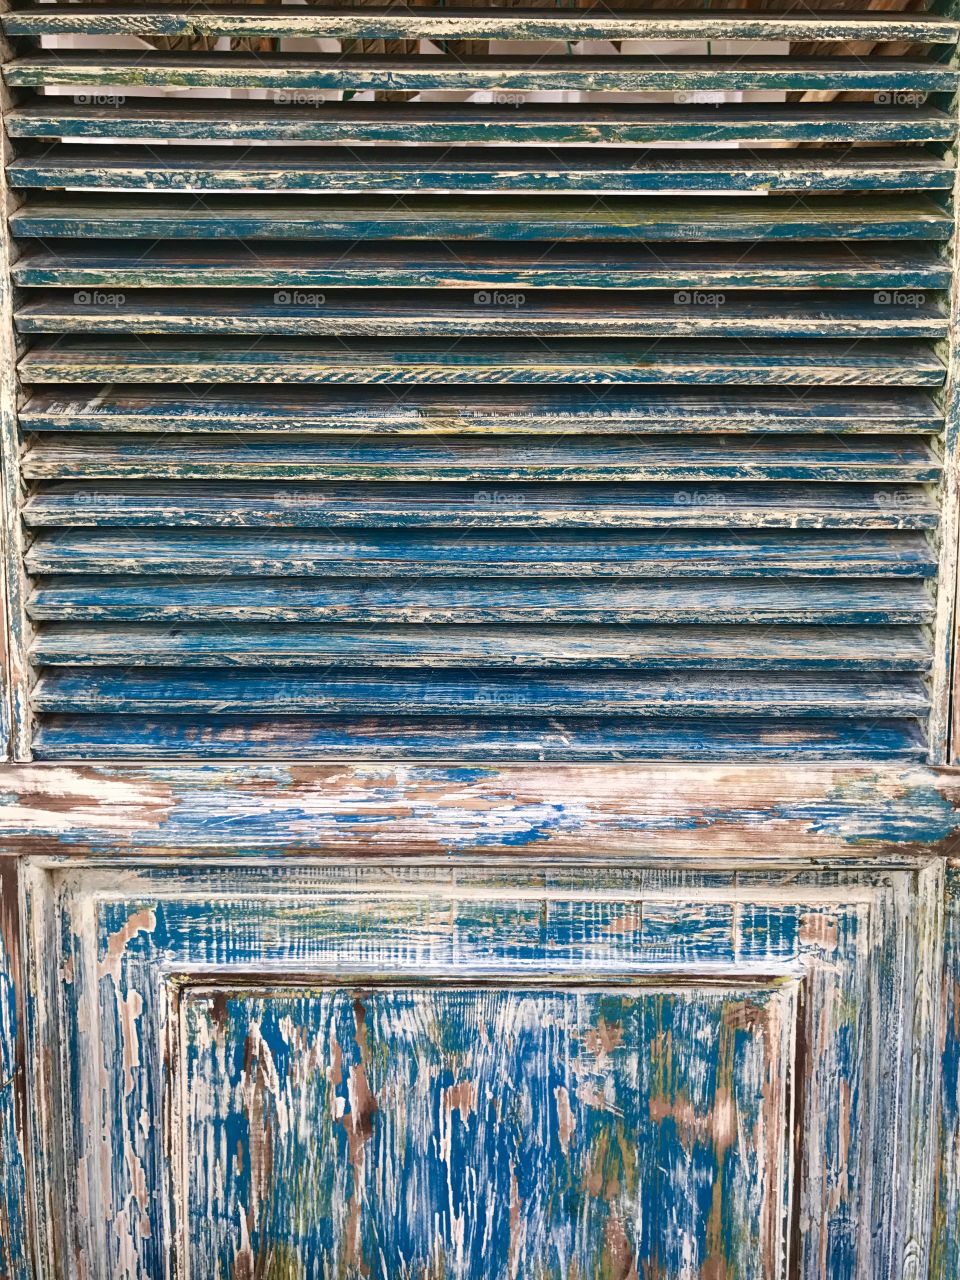 View of weathered wood